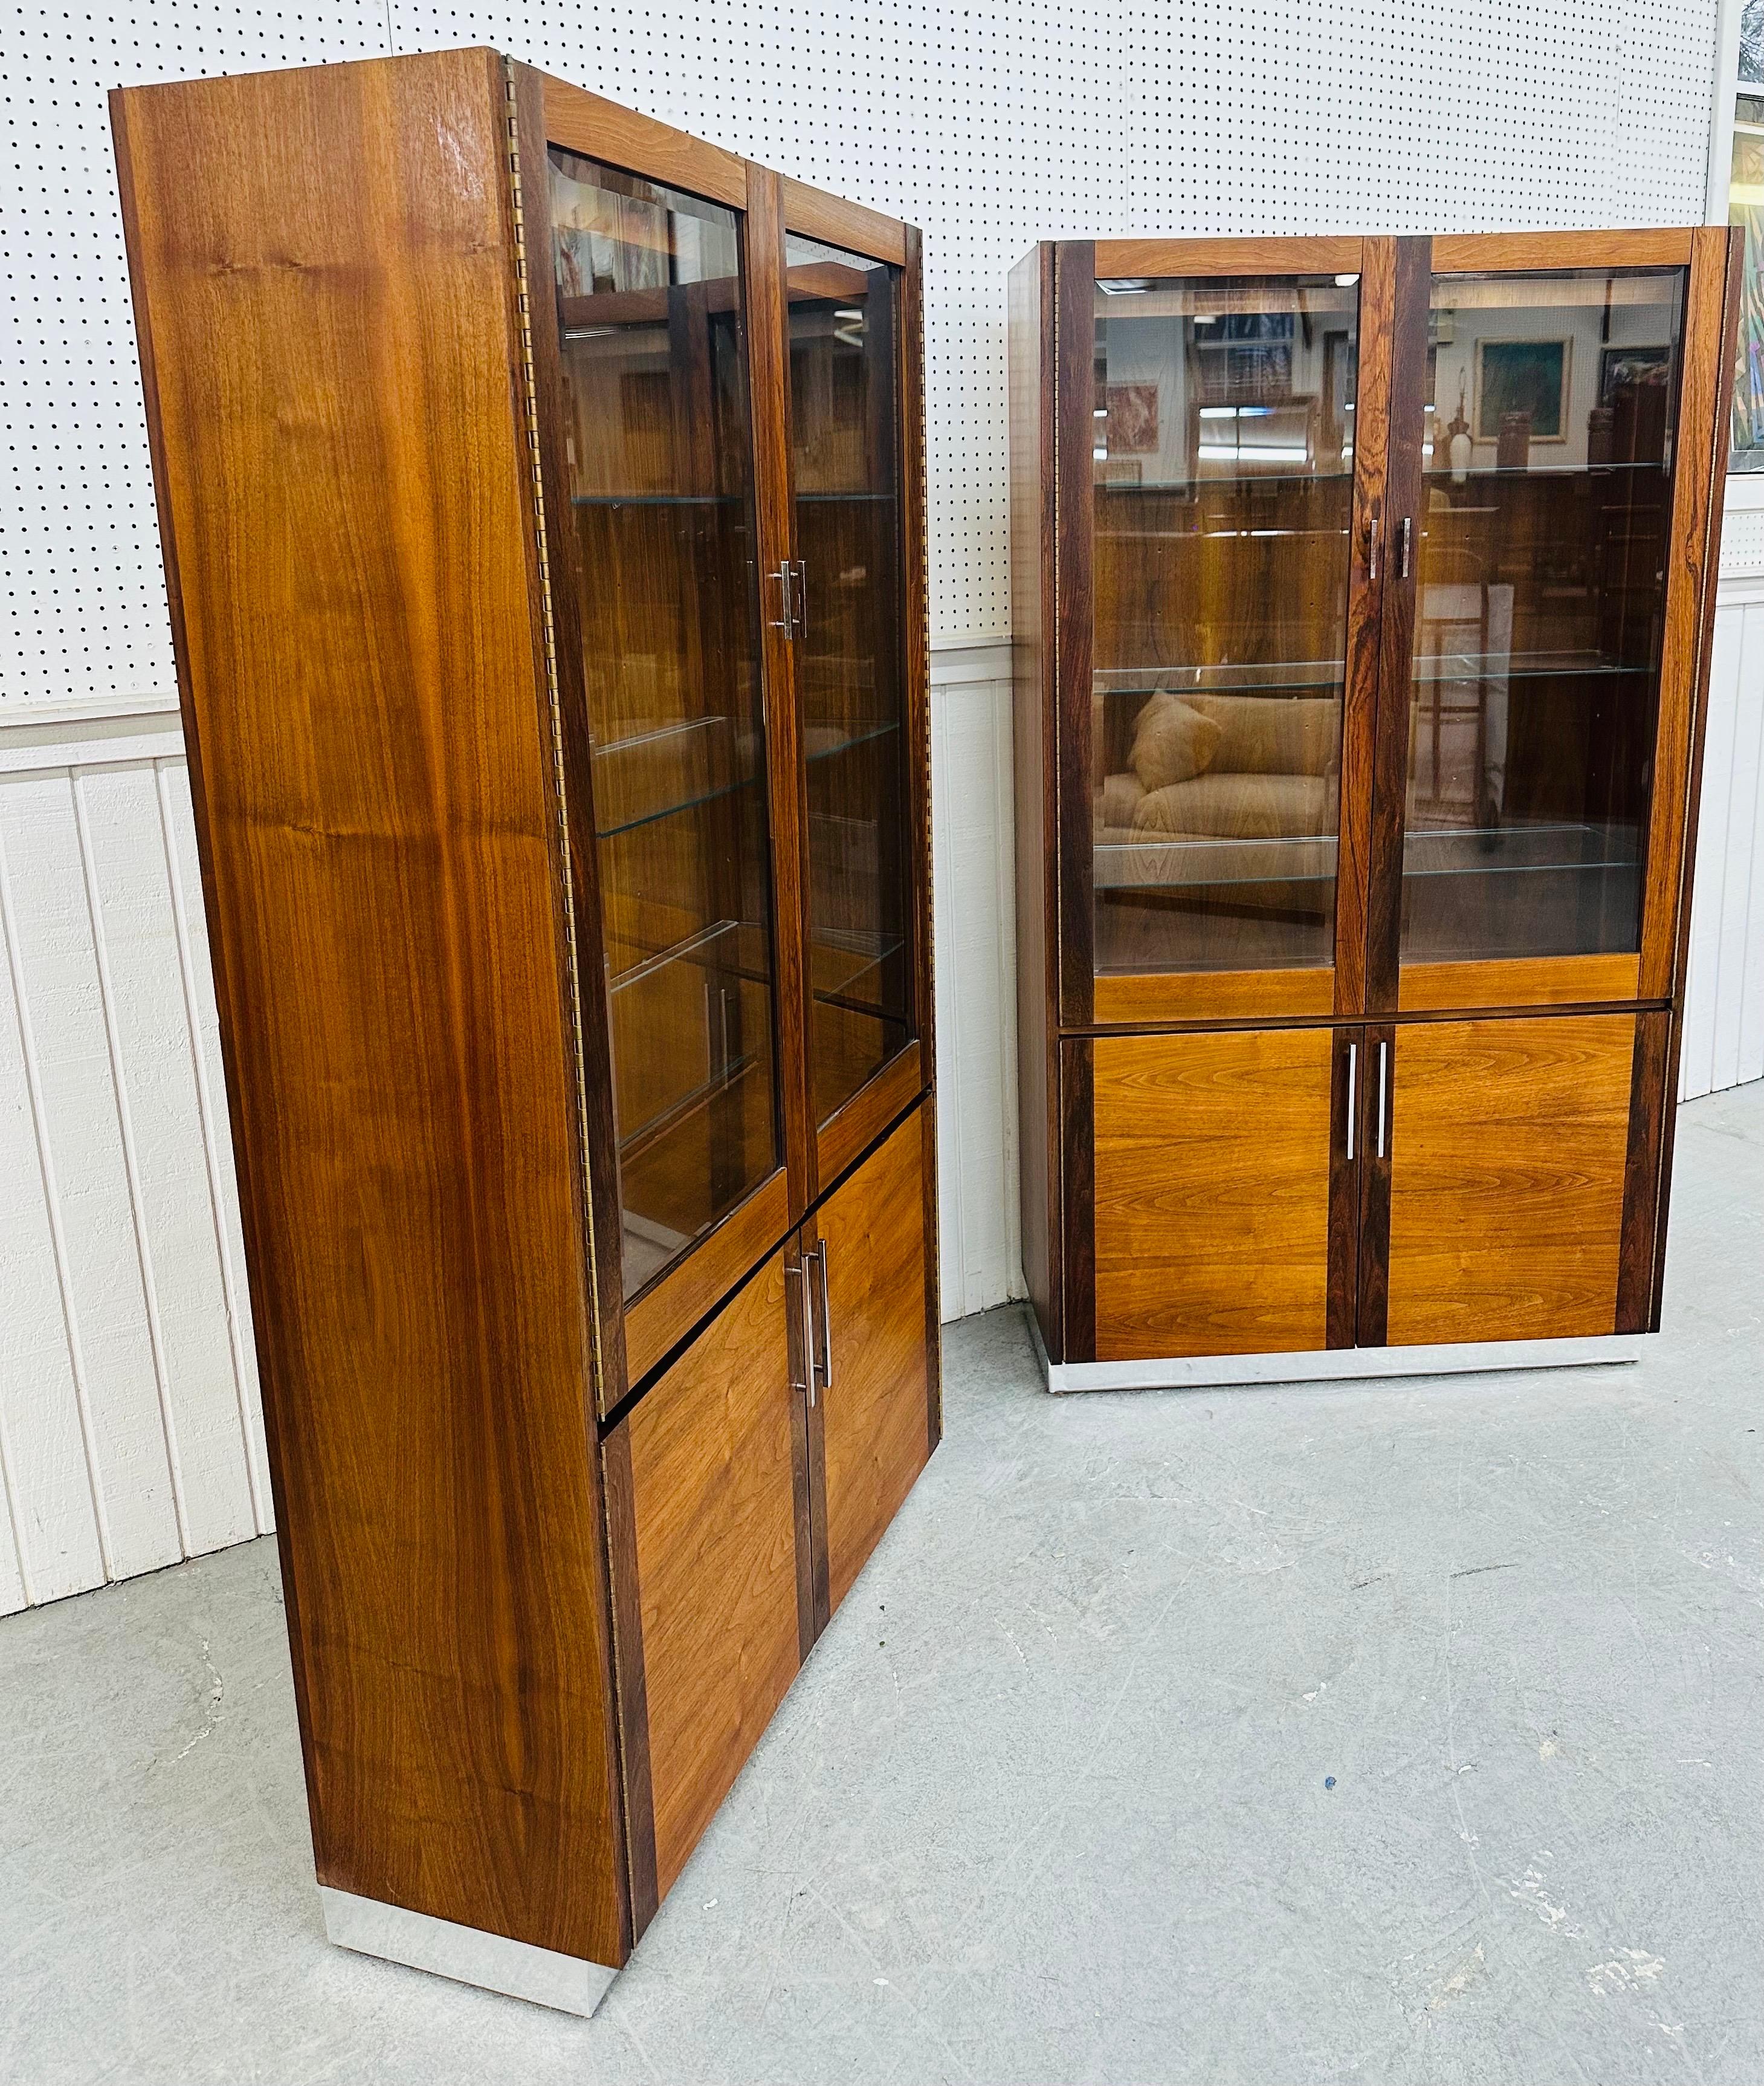 This listing is for a pair of Mid-Century Modern Lane Walnut Display Cabinets. Featuring a straight line design, two glass doors that open up to three glass shelves for storage, two cabinet doors at the bottom that open up to shelving for more